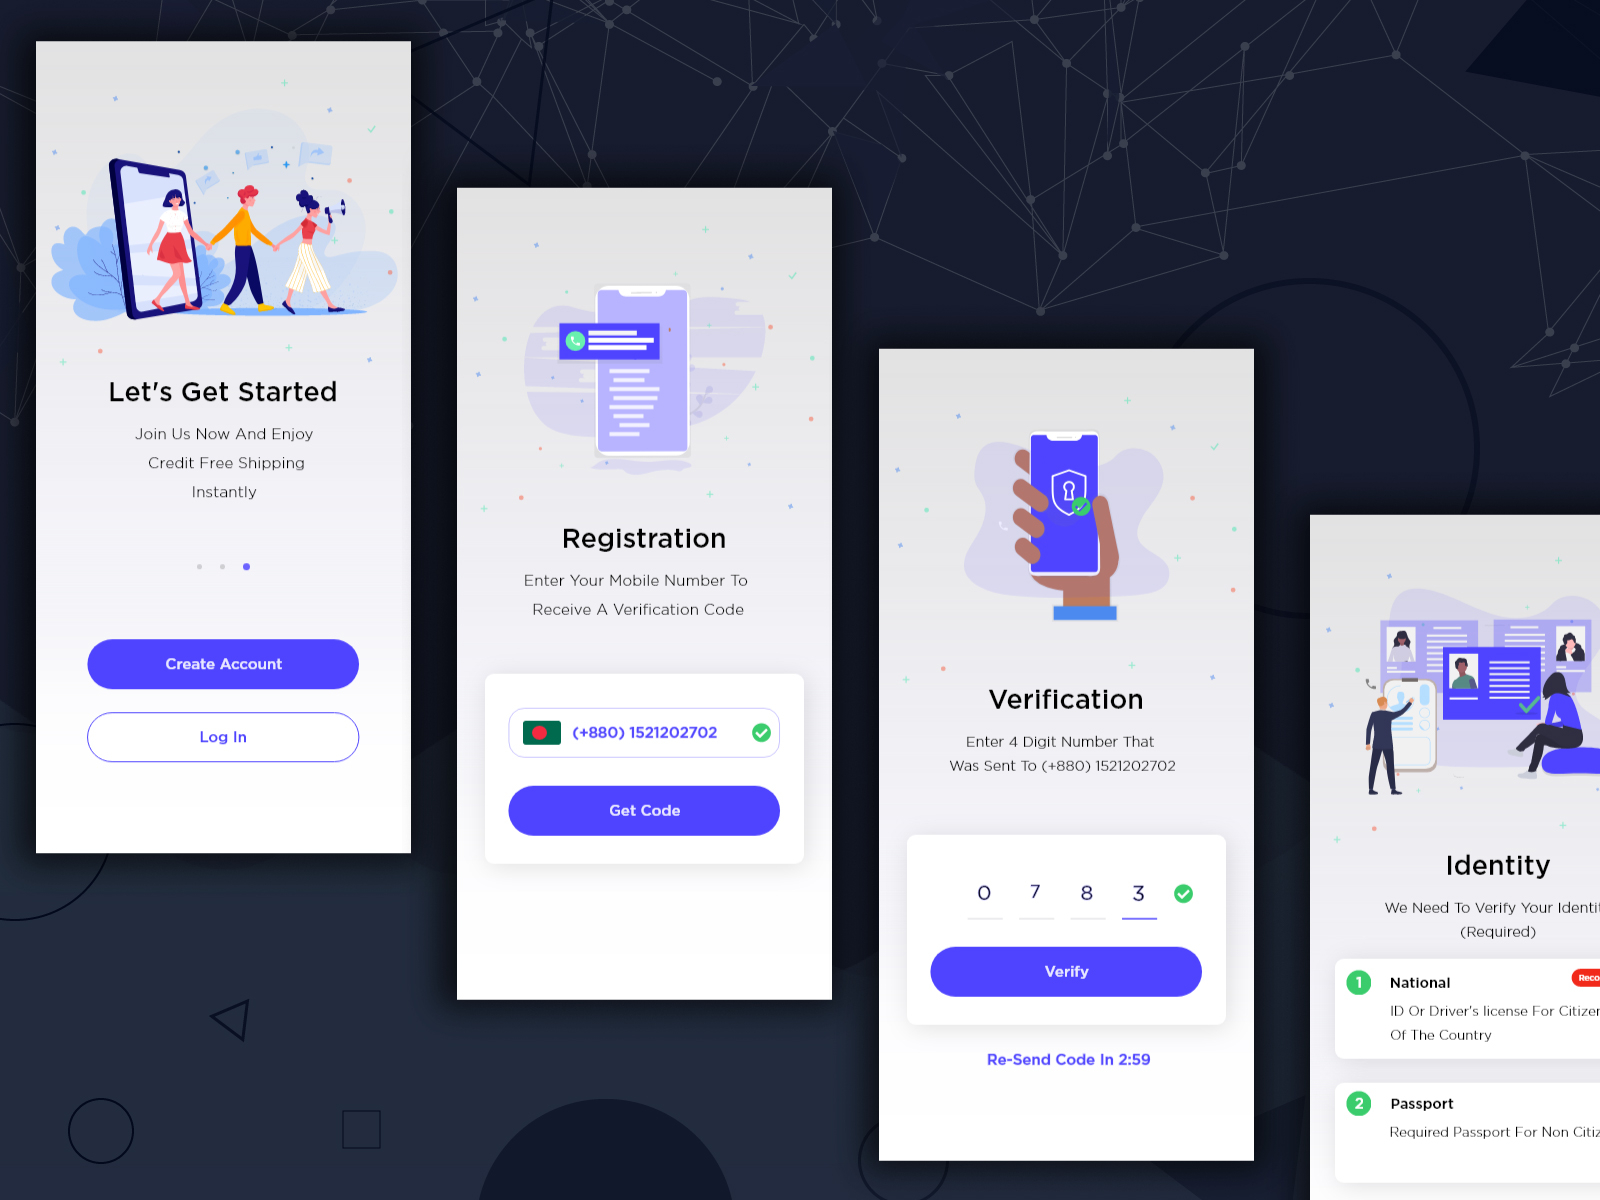 App UI - Sign Up by Md. Yasin Khan on Dribbble